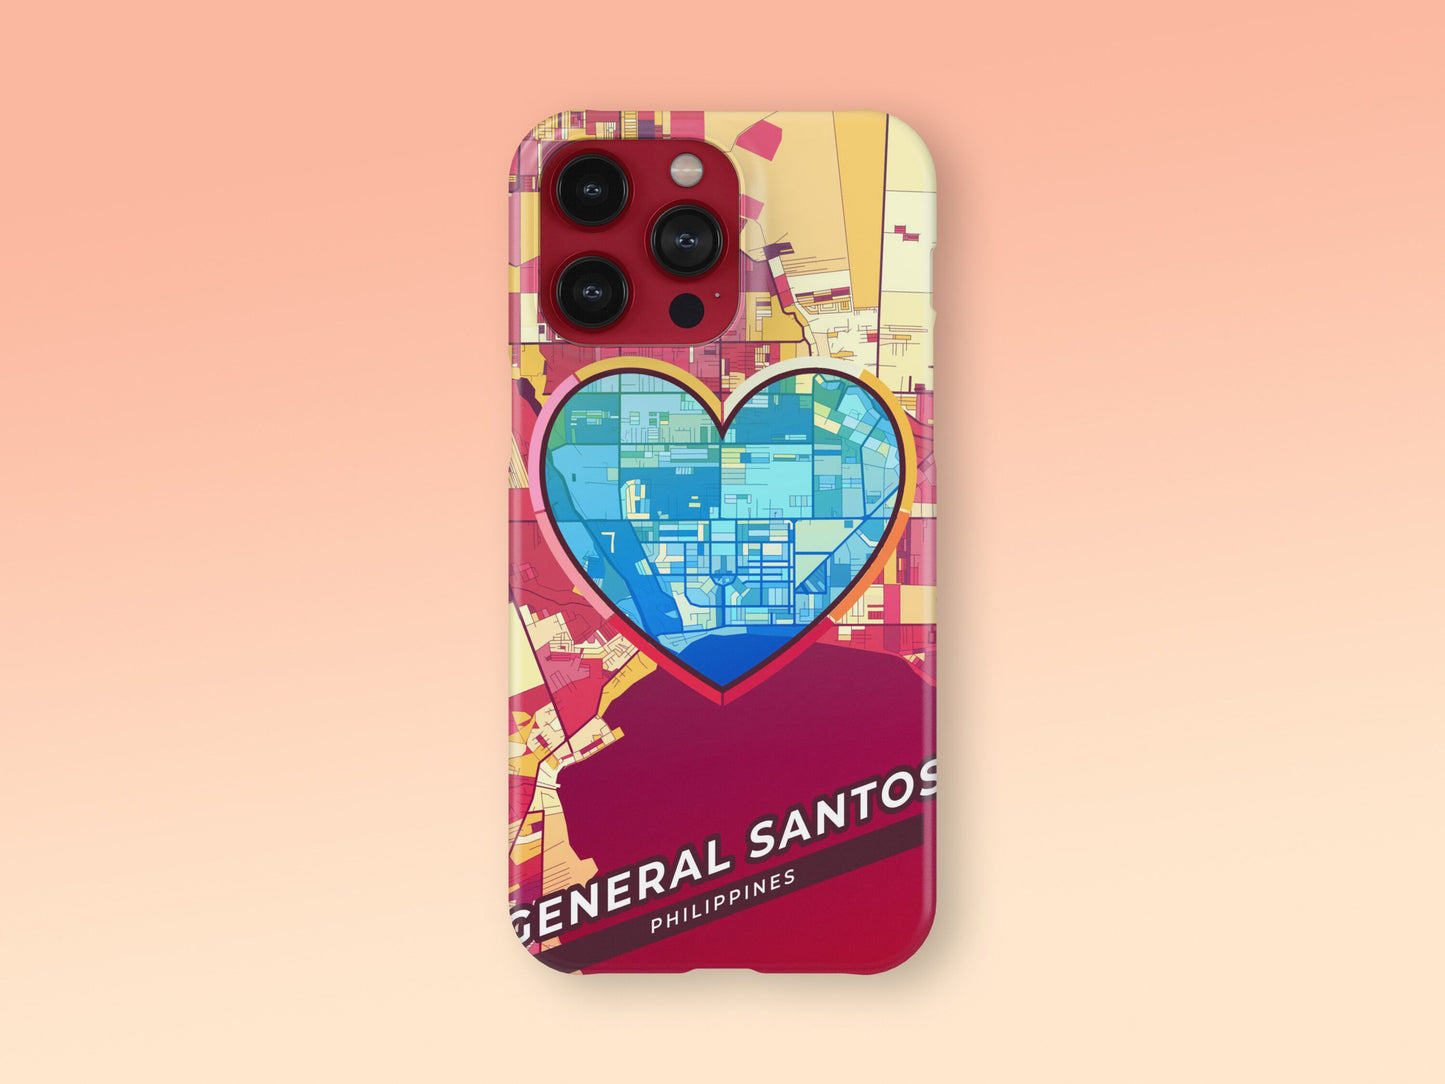 General Santos Philippines slim phone case with colorful icon. Birthday, wedding or housewarming gift. Couple match cases. 2